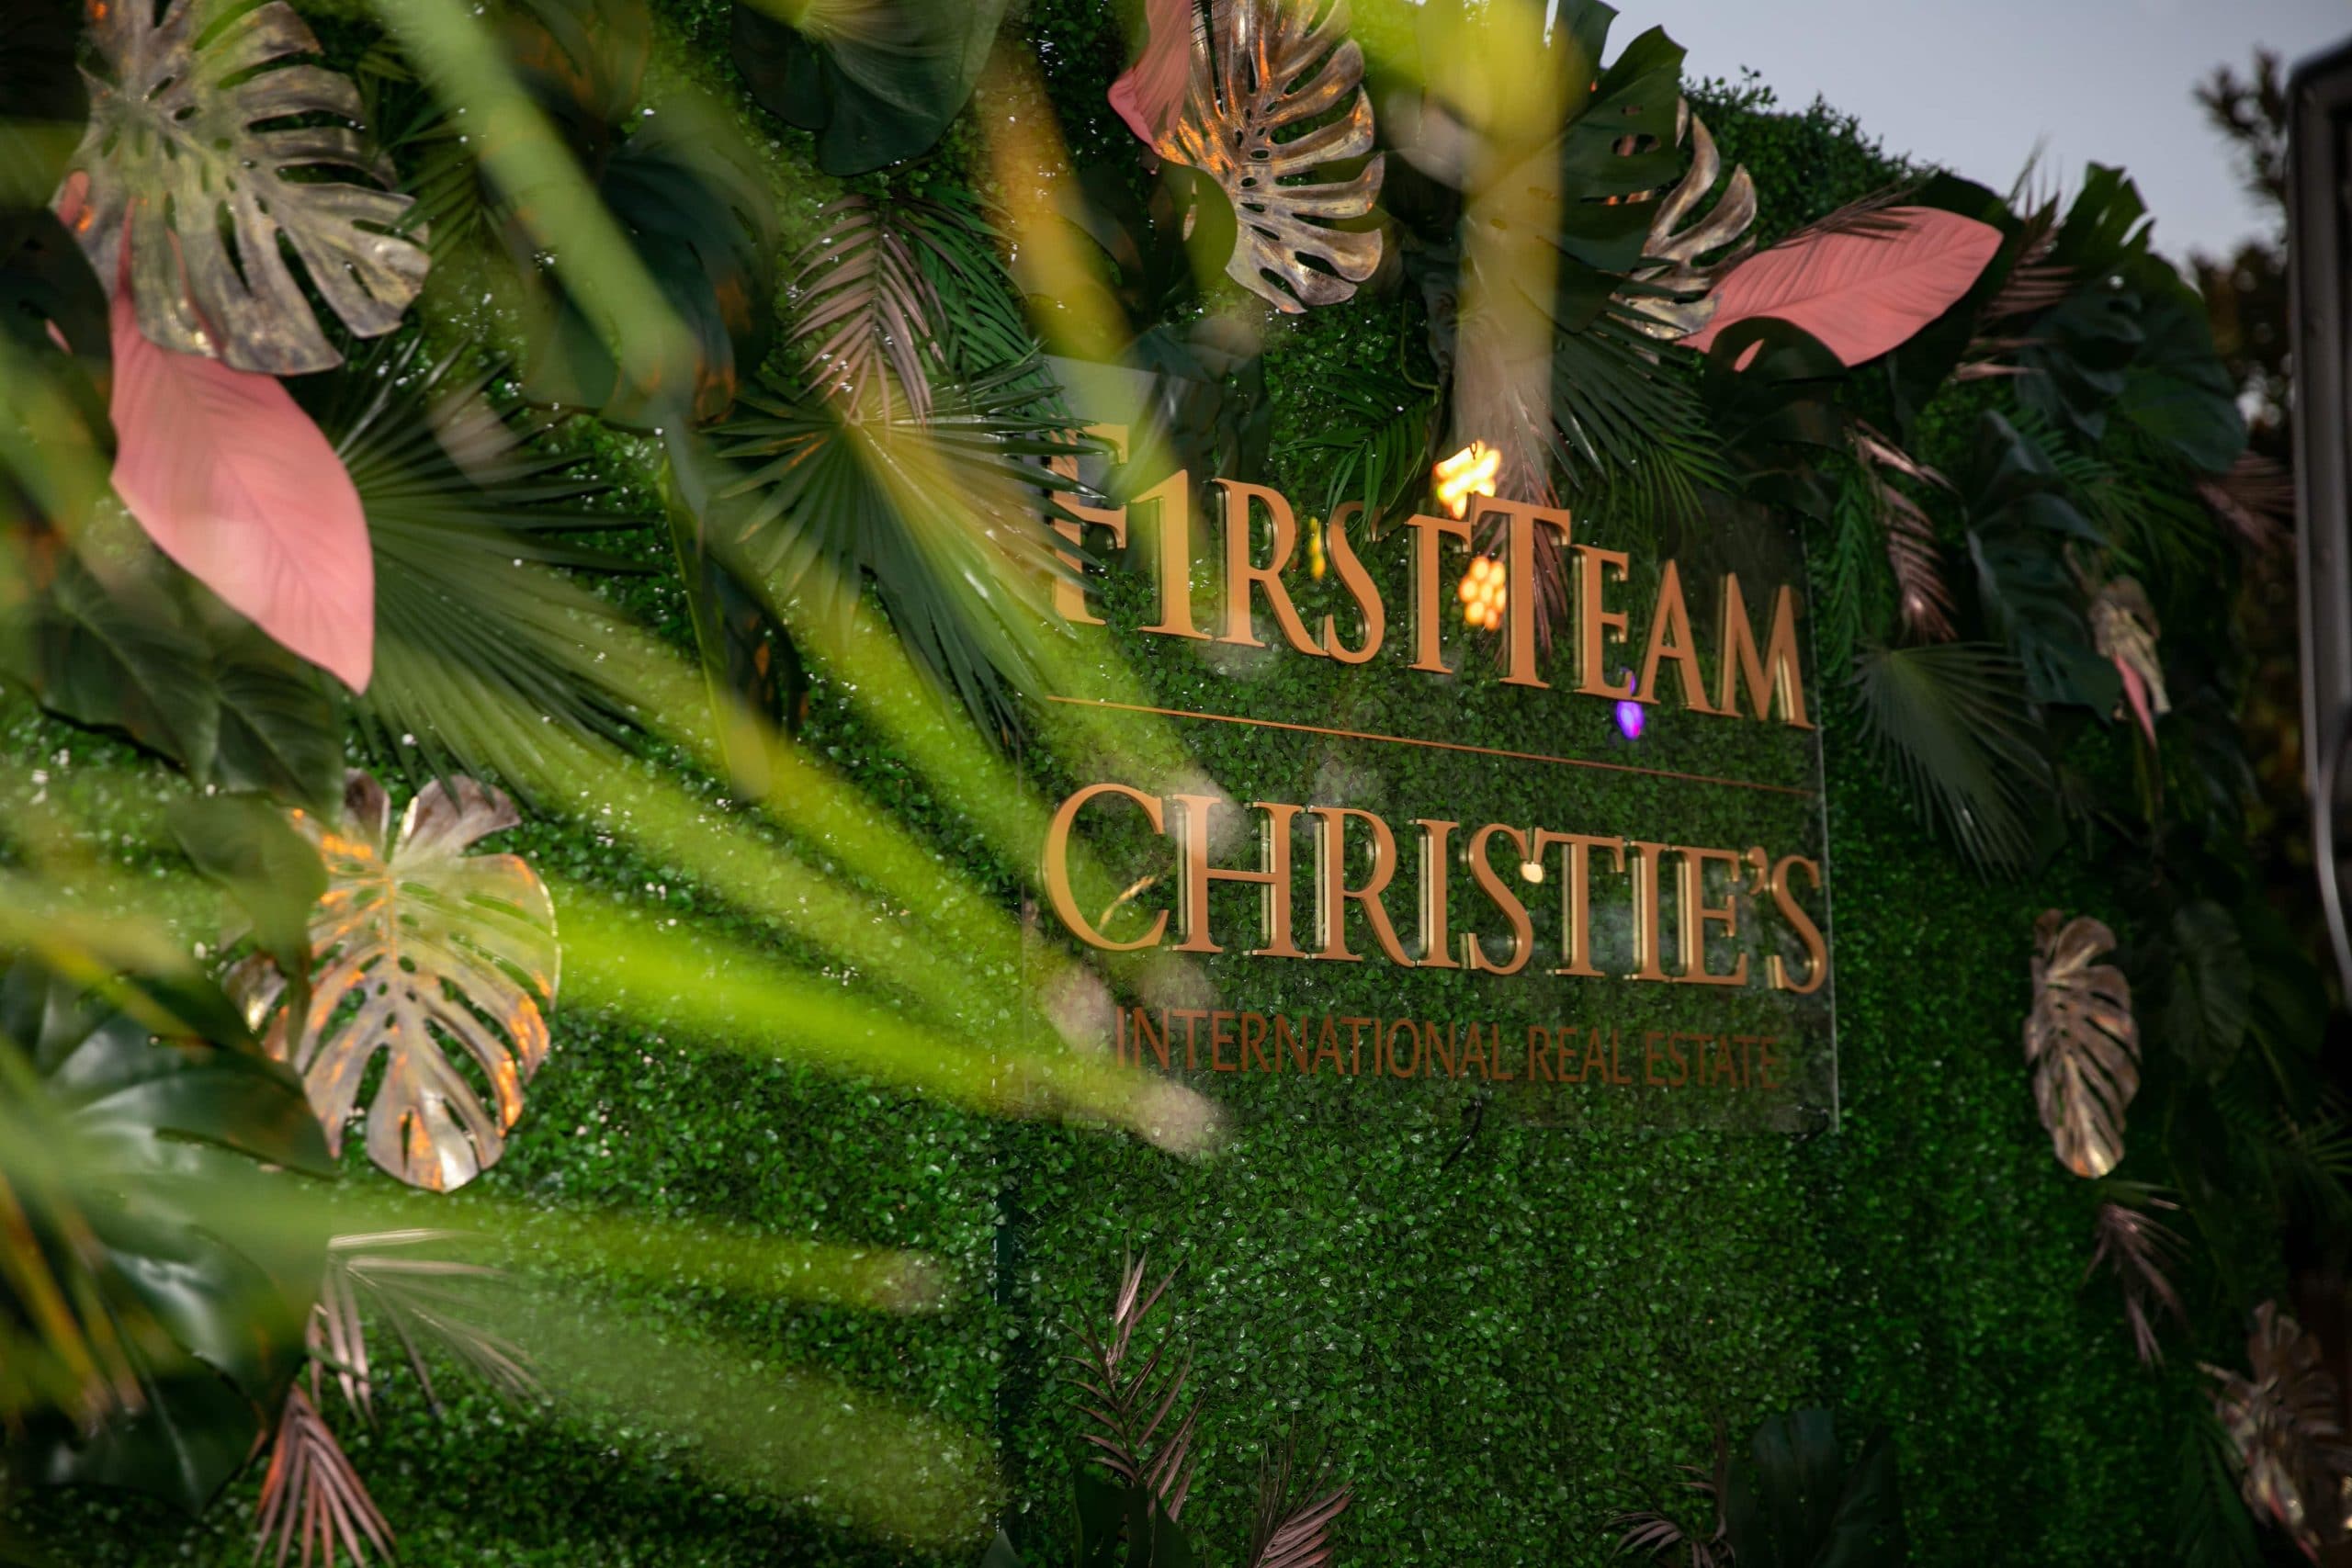 First Team Christie'S Logo On Greenery Wall With Palm Leaves